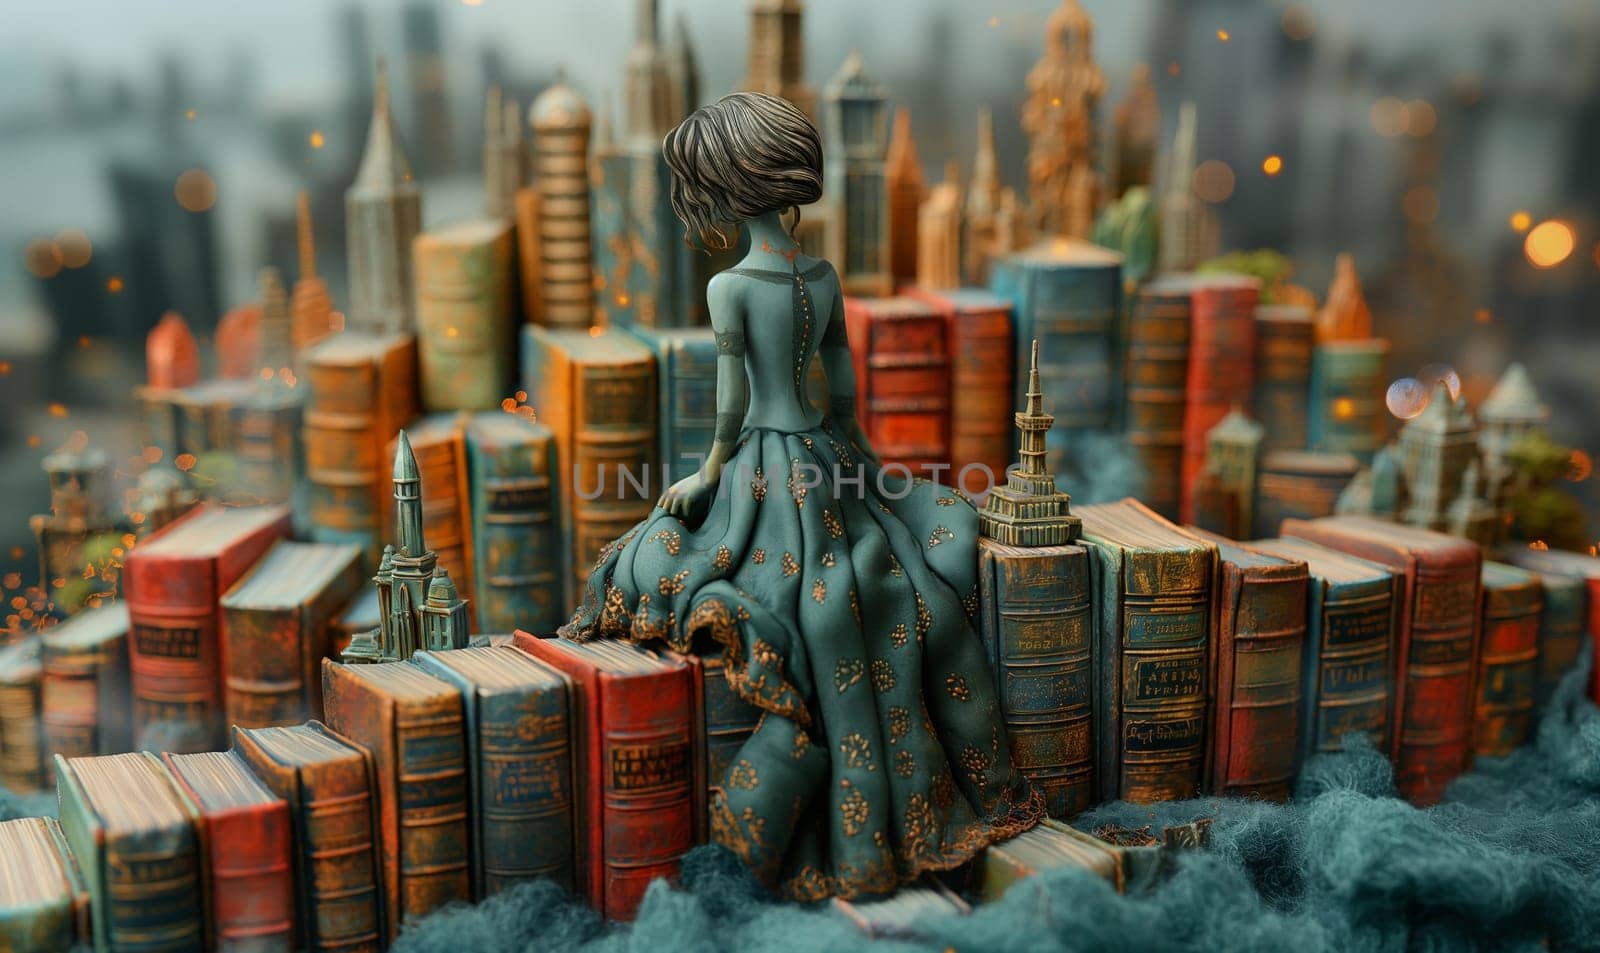 Girl Sitting on Stack of Books. by Fischeron